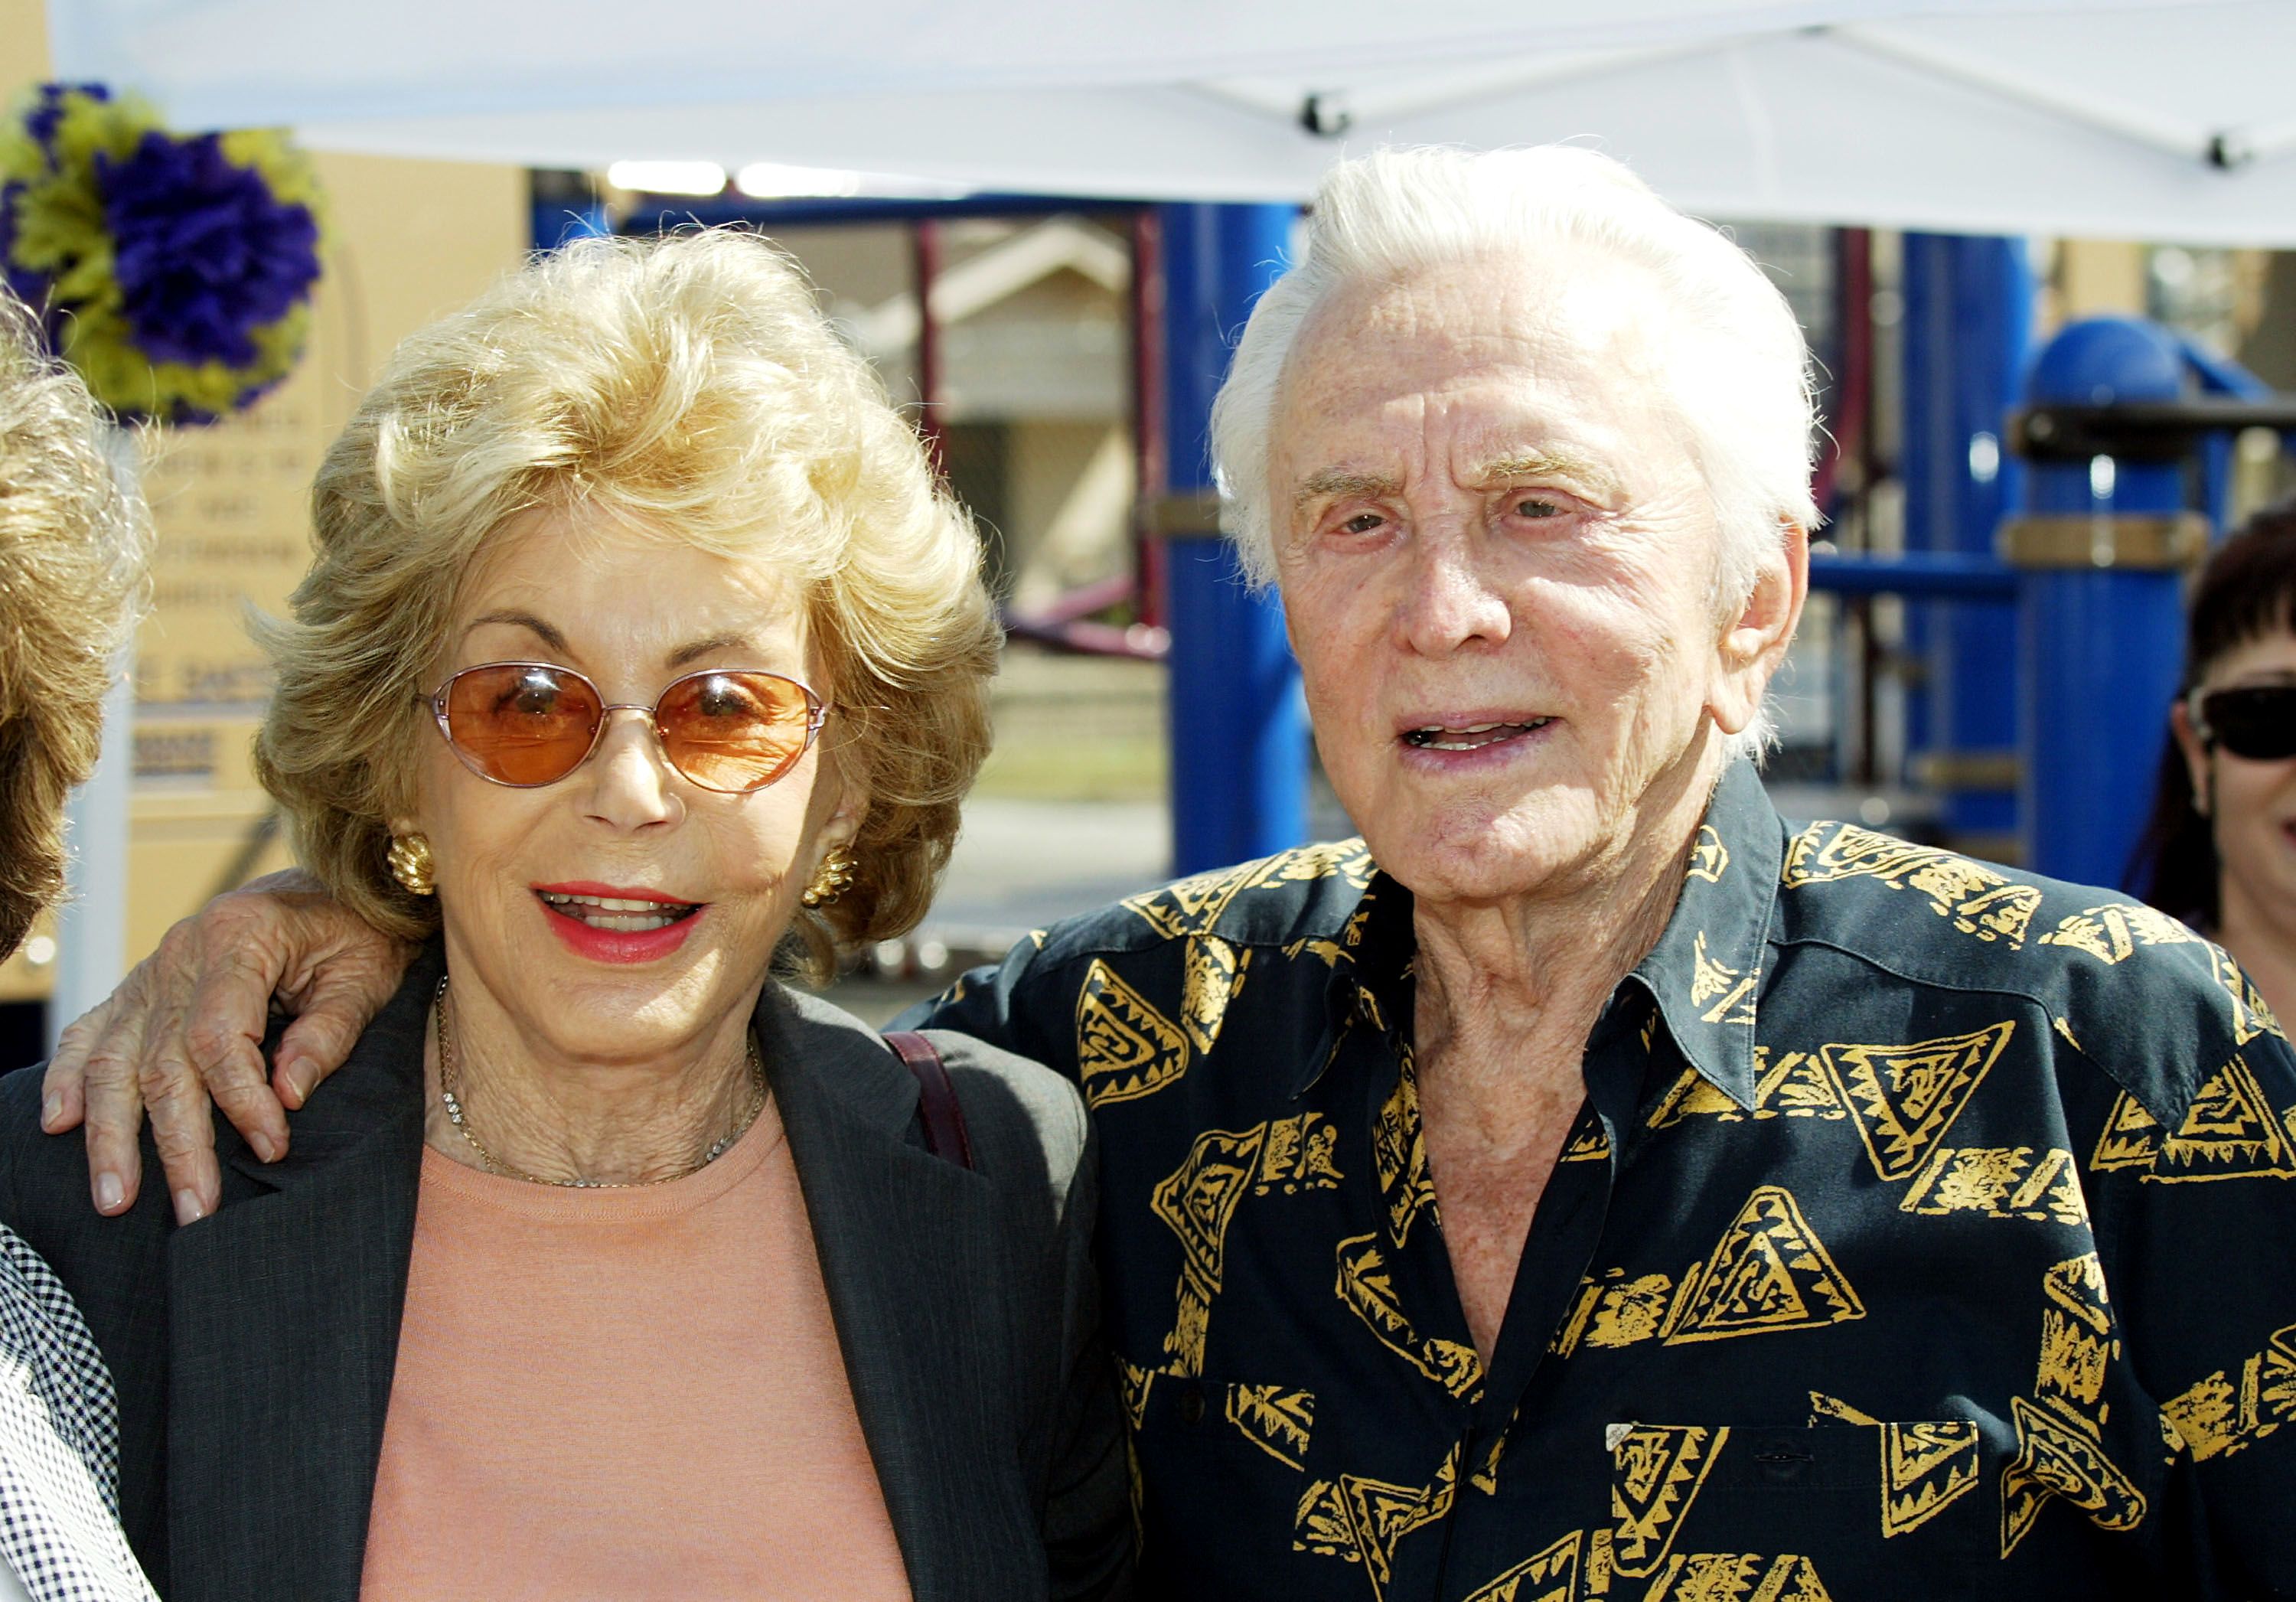 Kirk Douglas and wife Anne Douglas at Florence Avenue School on September 3, 2003 in South Los Angeles, California | Photo: Getty Images